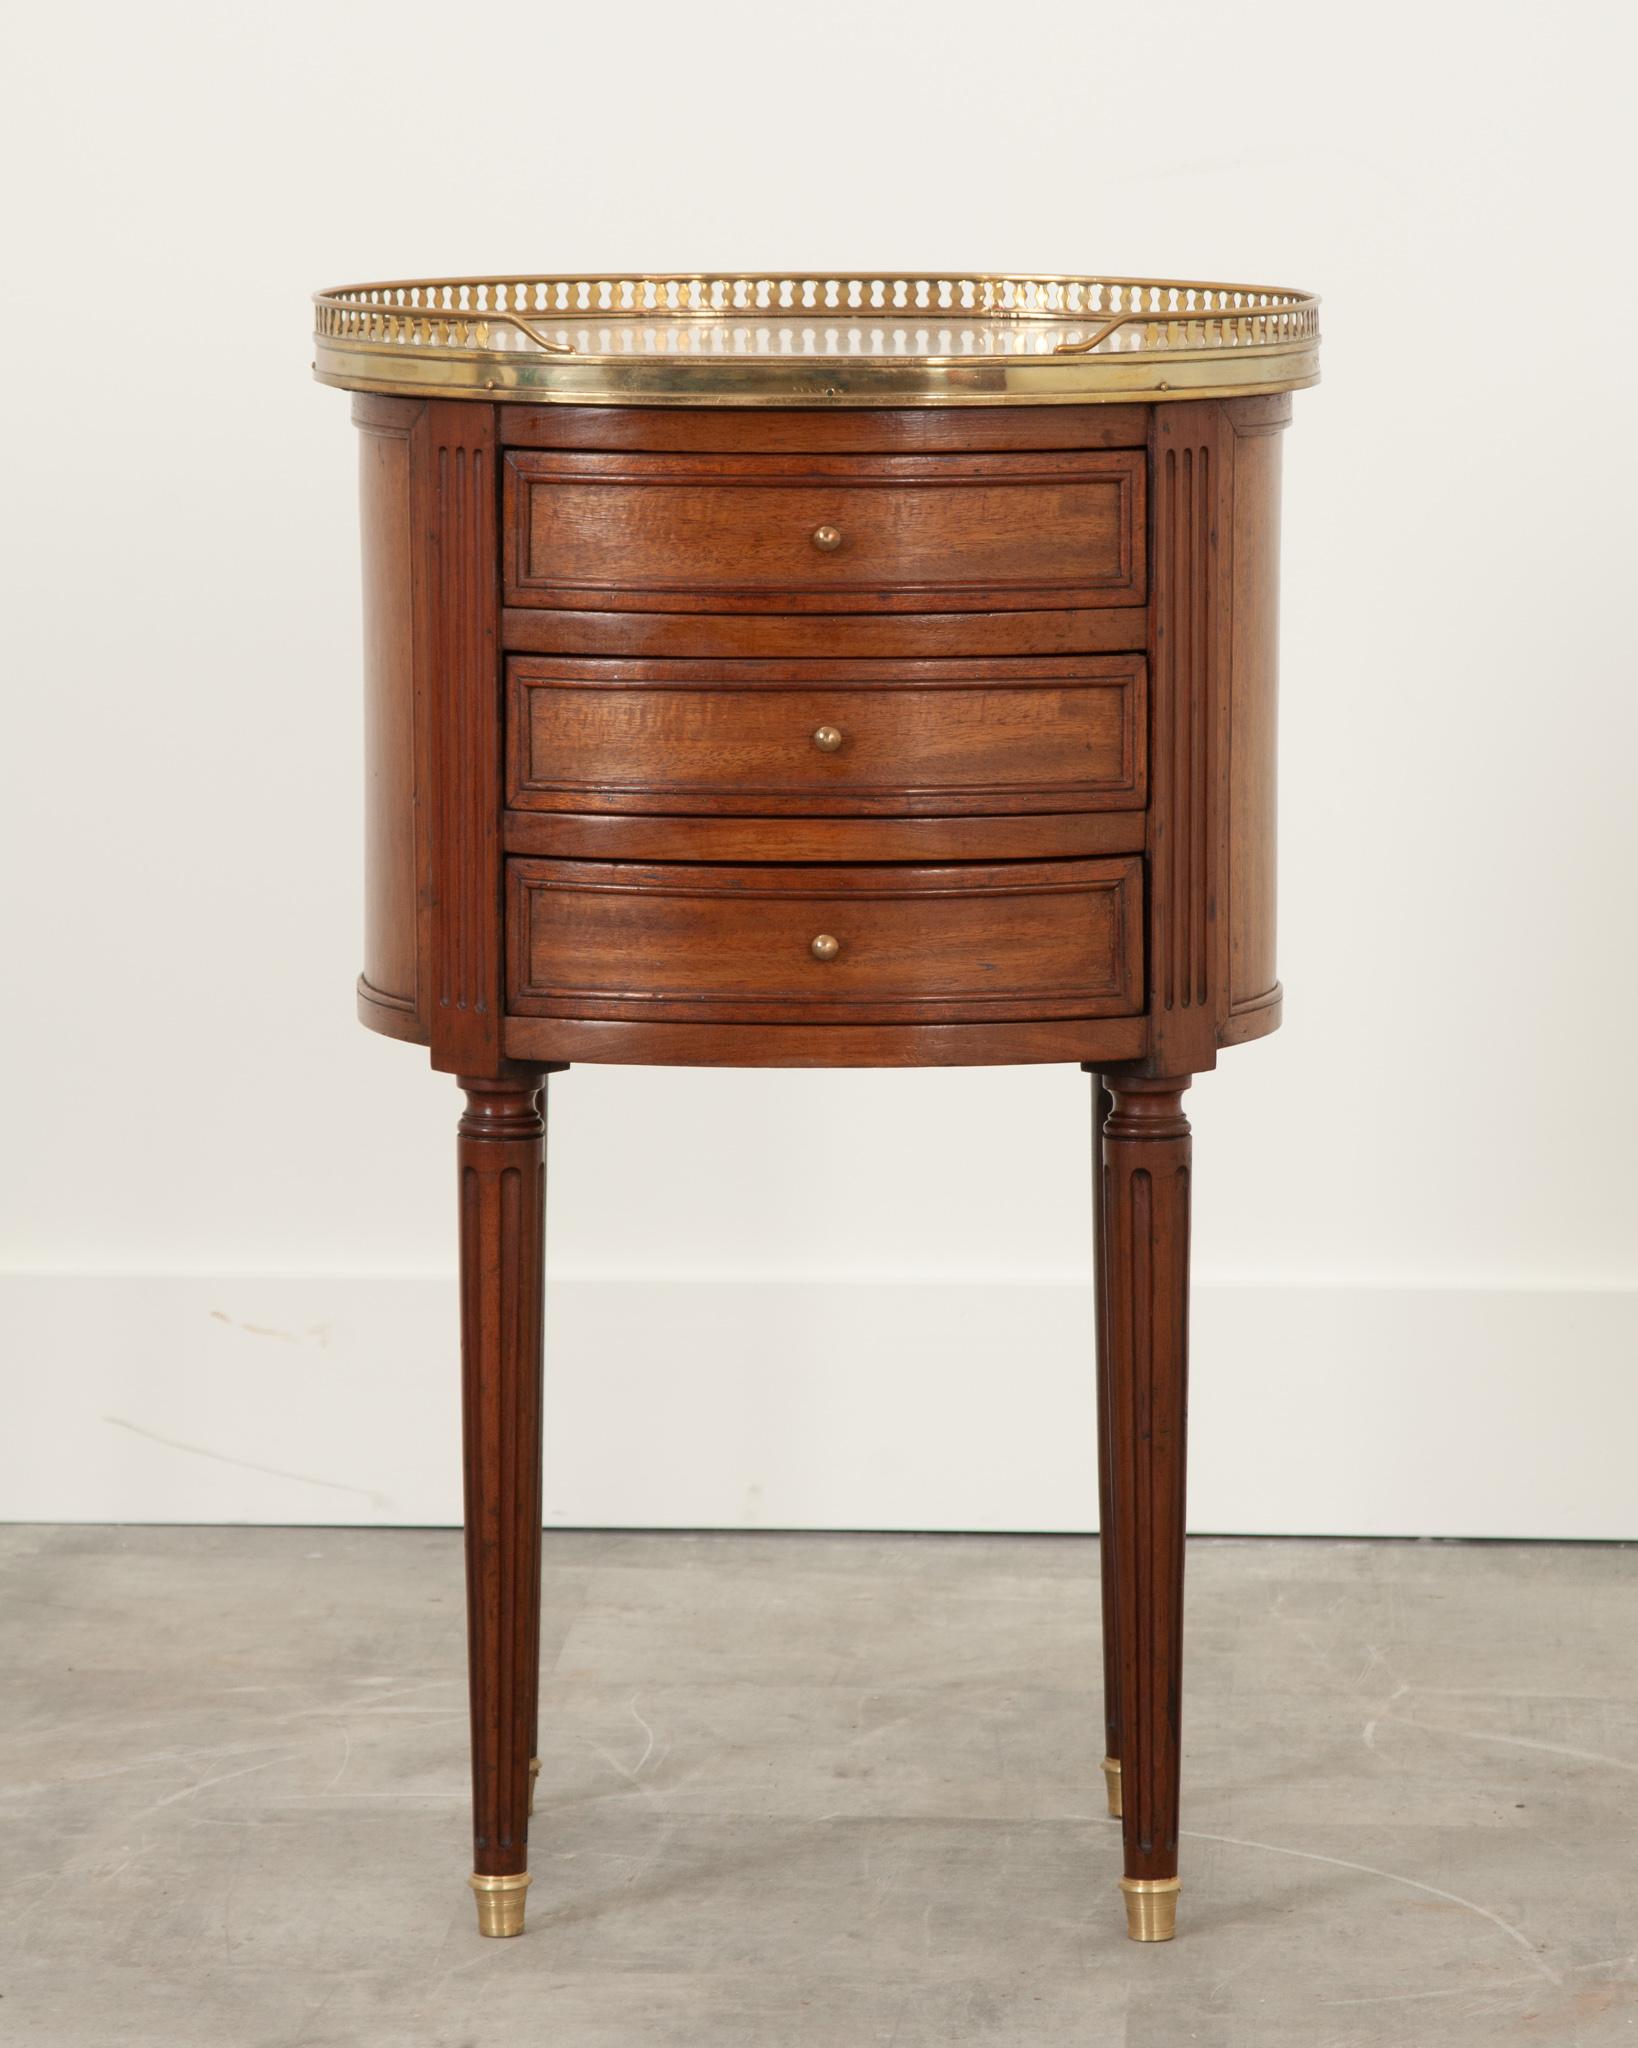 This charming mahogany bedside table was crafted in 19th century France. A breakfront pierced brass gallery surrounds the antique white marble top. Some discoloration and a hairline crack from many years of use are visible on the top. Three drawers